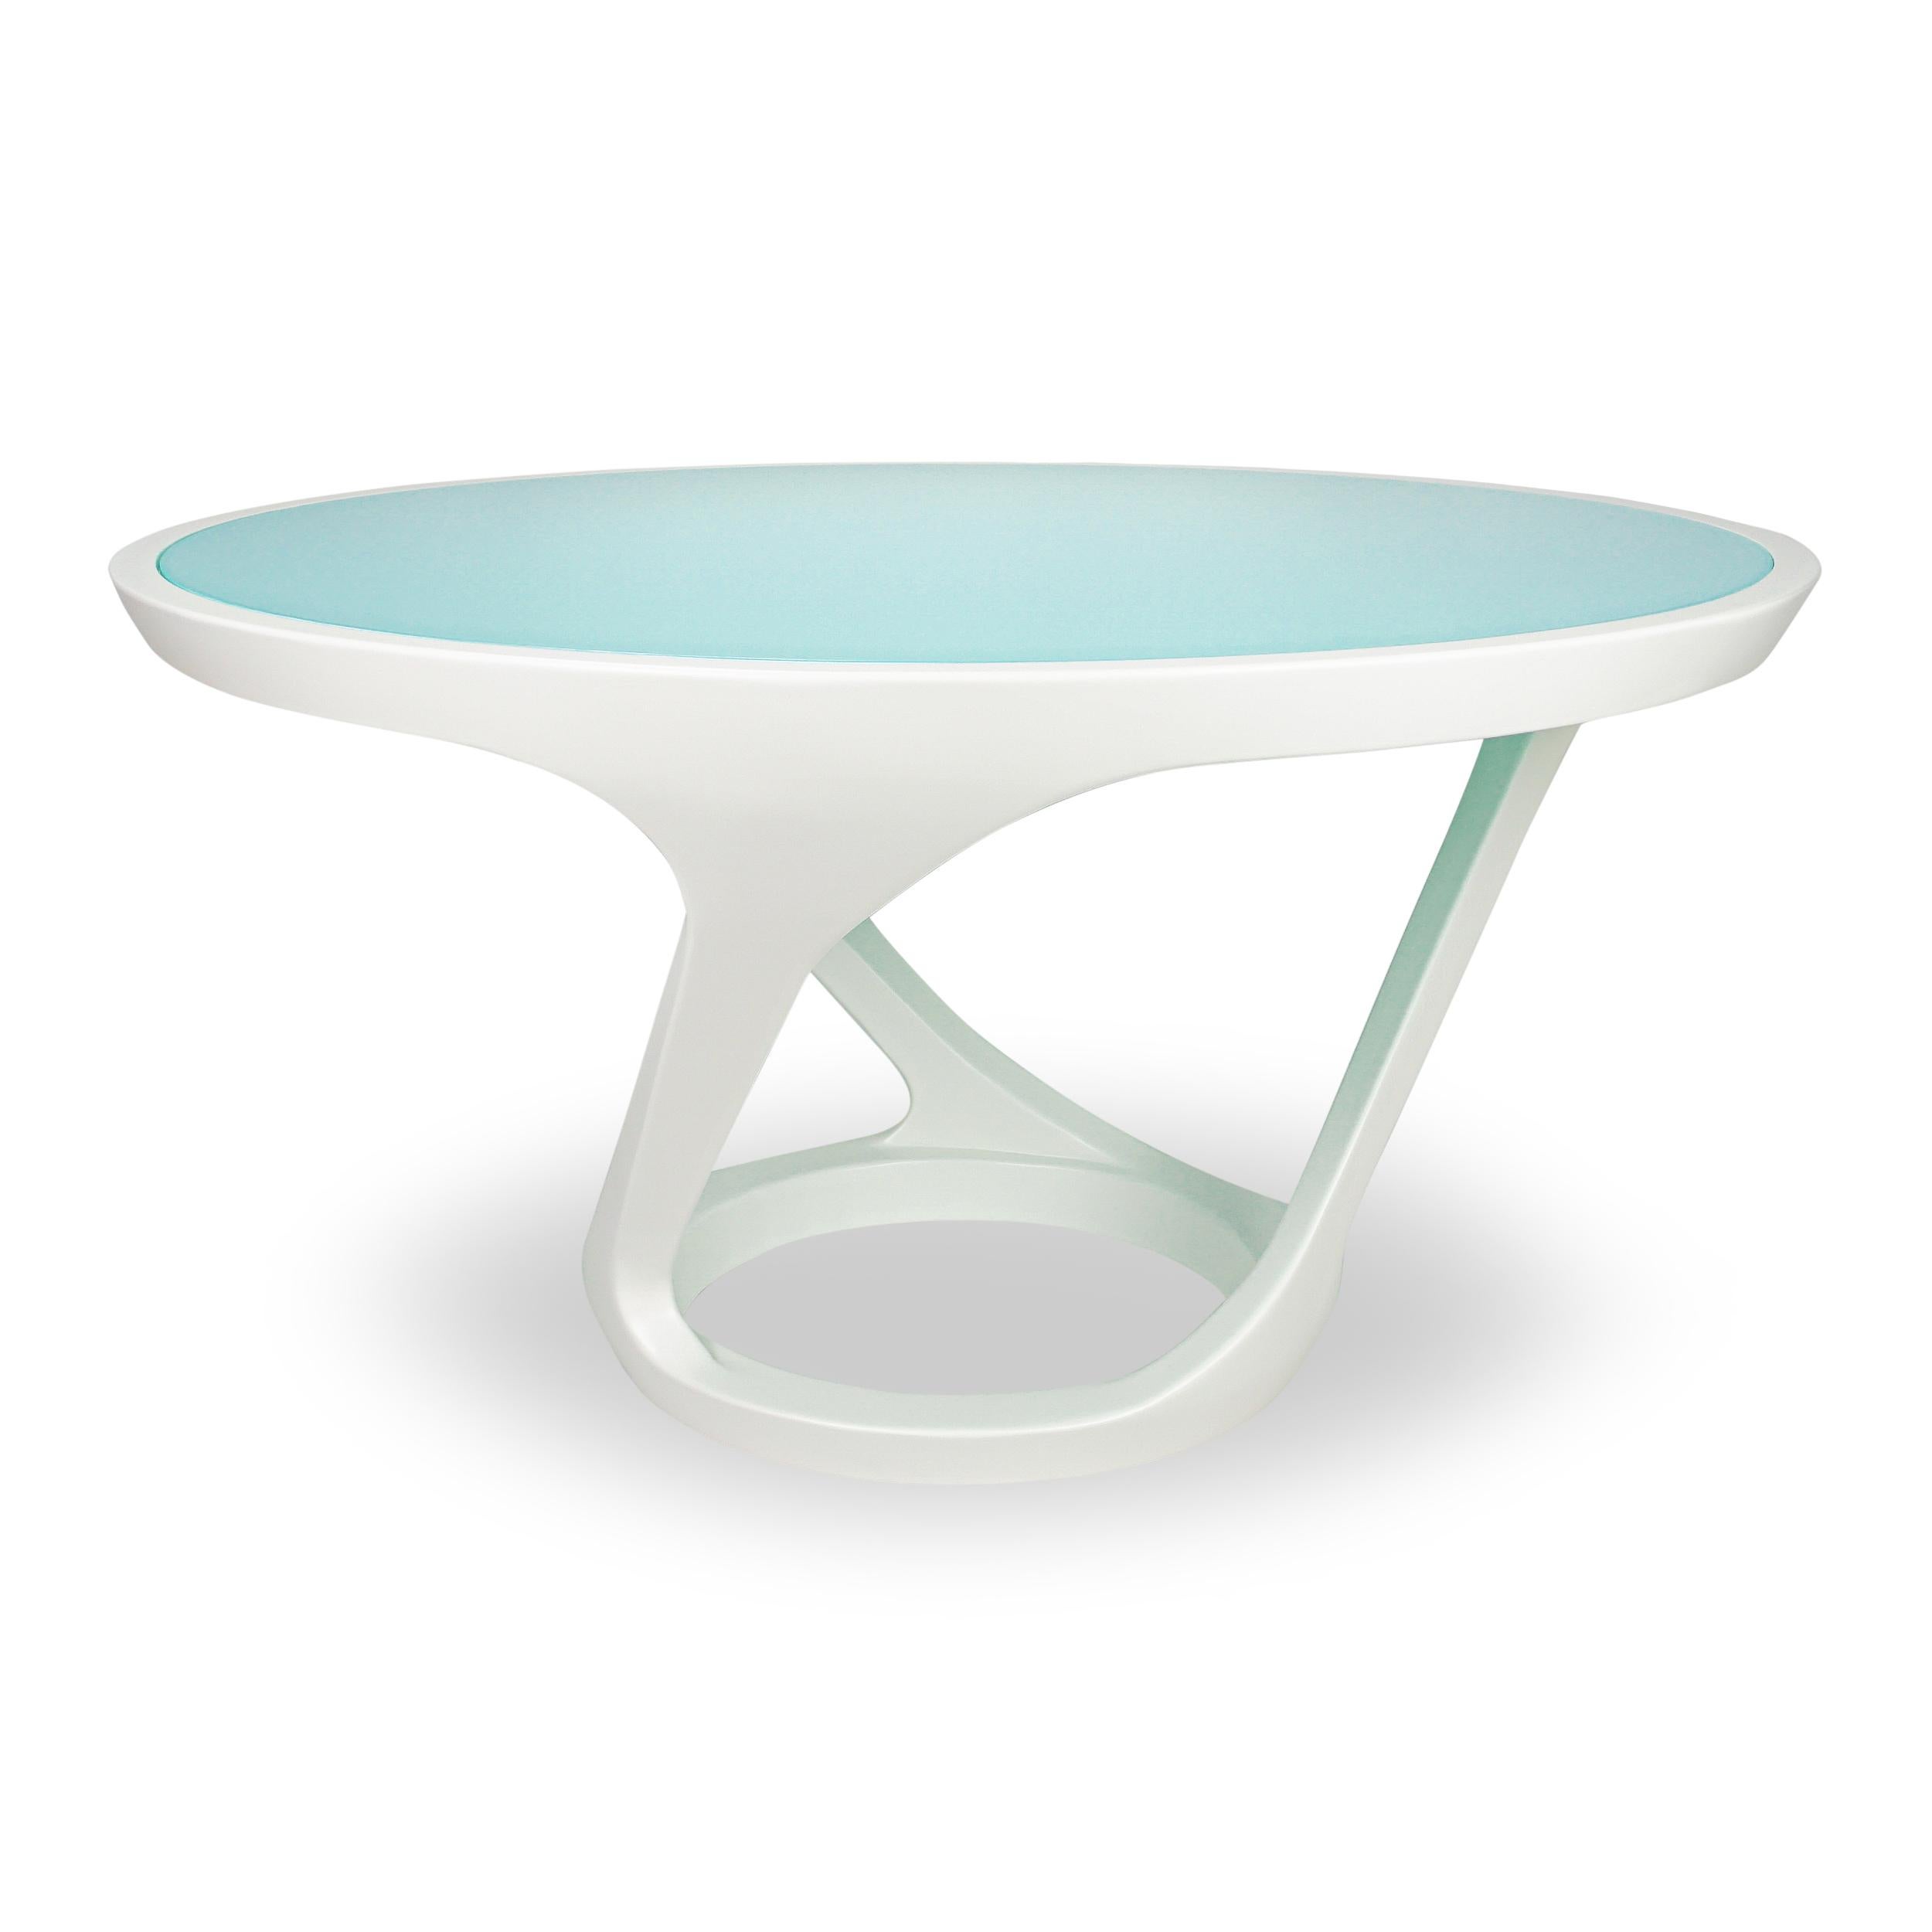 Modern Jamaican Aqua Glass Inset and White Lacquer Dining Table   In New Condition For Sale In Greenwich, CT